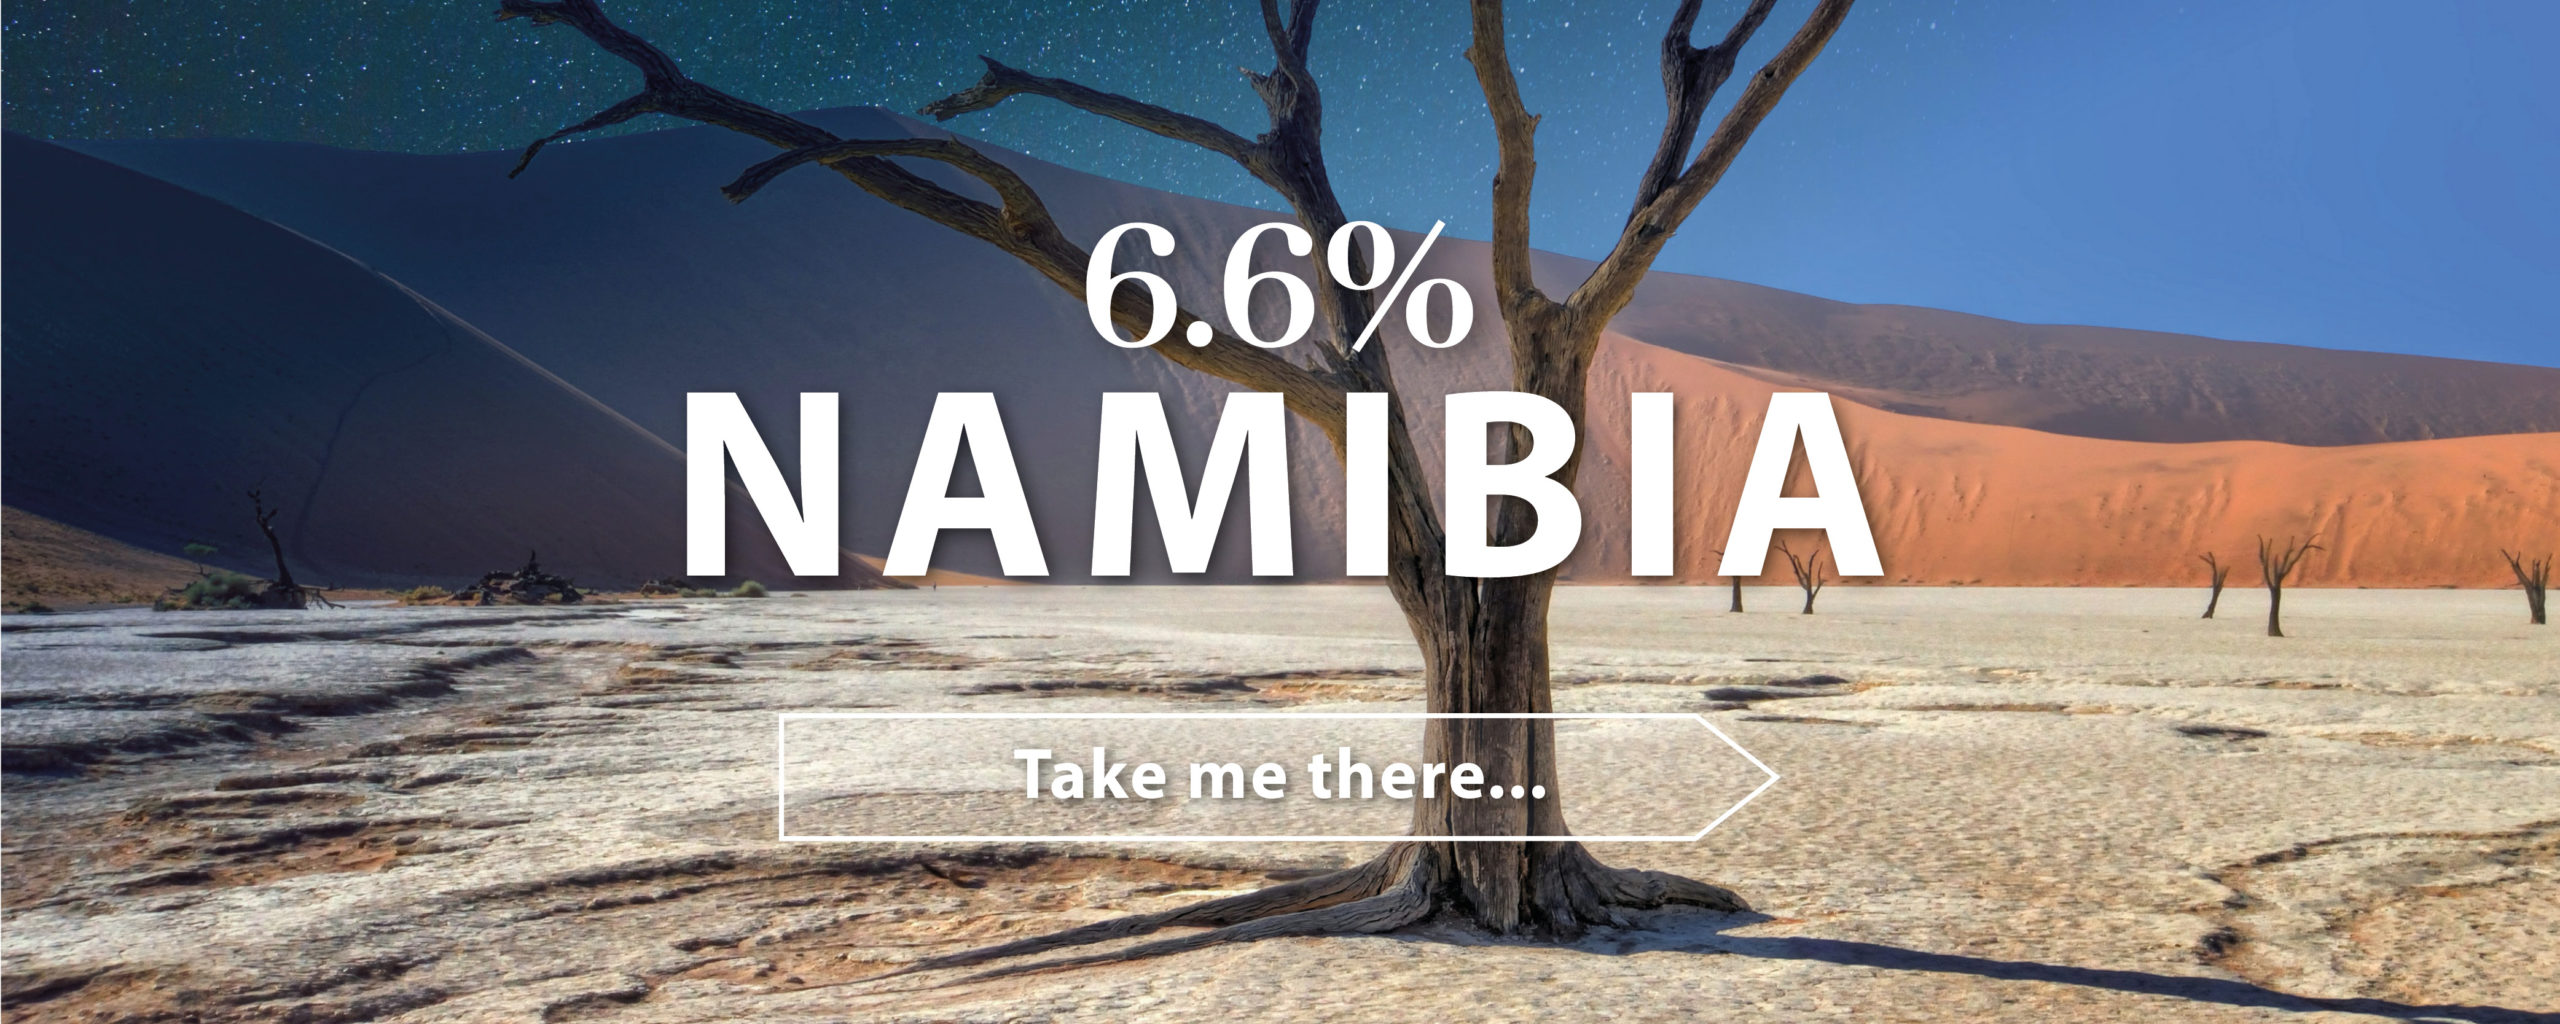 Where youre going this year_Namibia